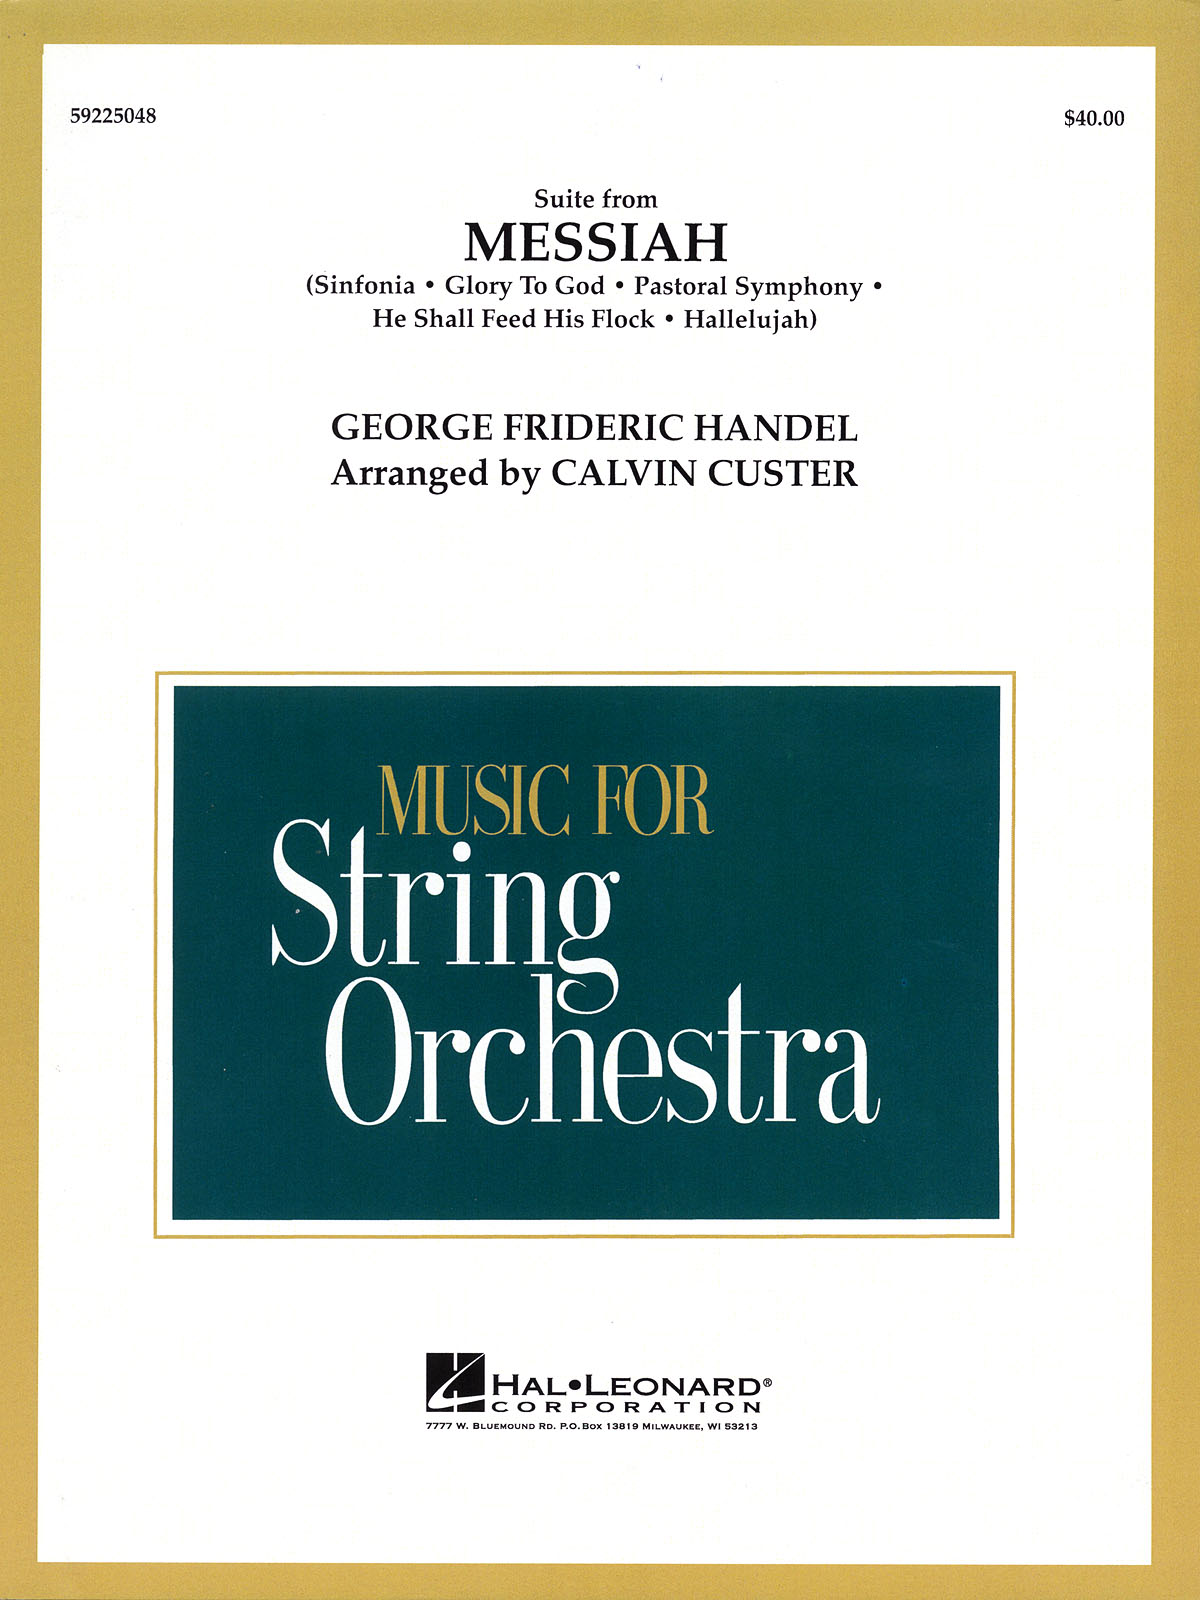 Georg Friedrich Hndel: The Messiah: String Orchestra: Score & Parts